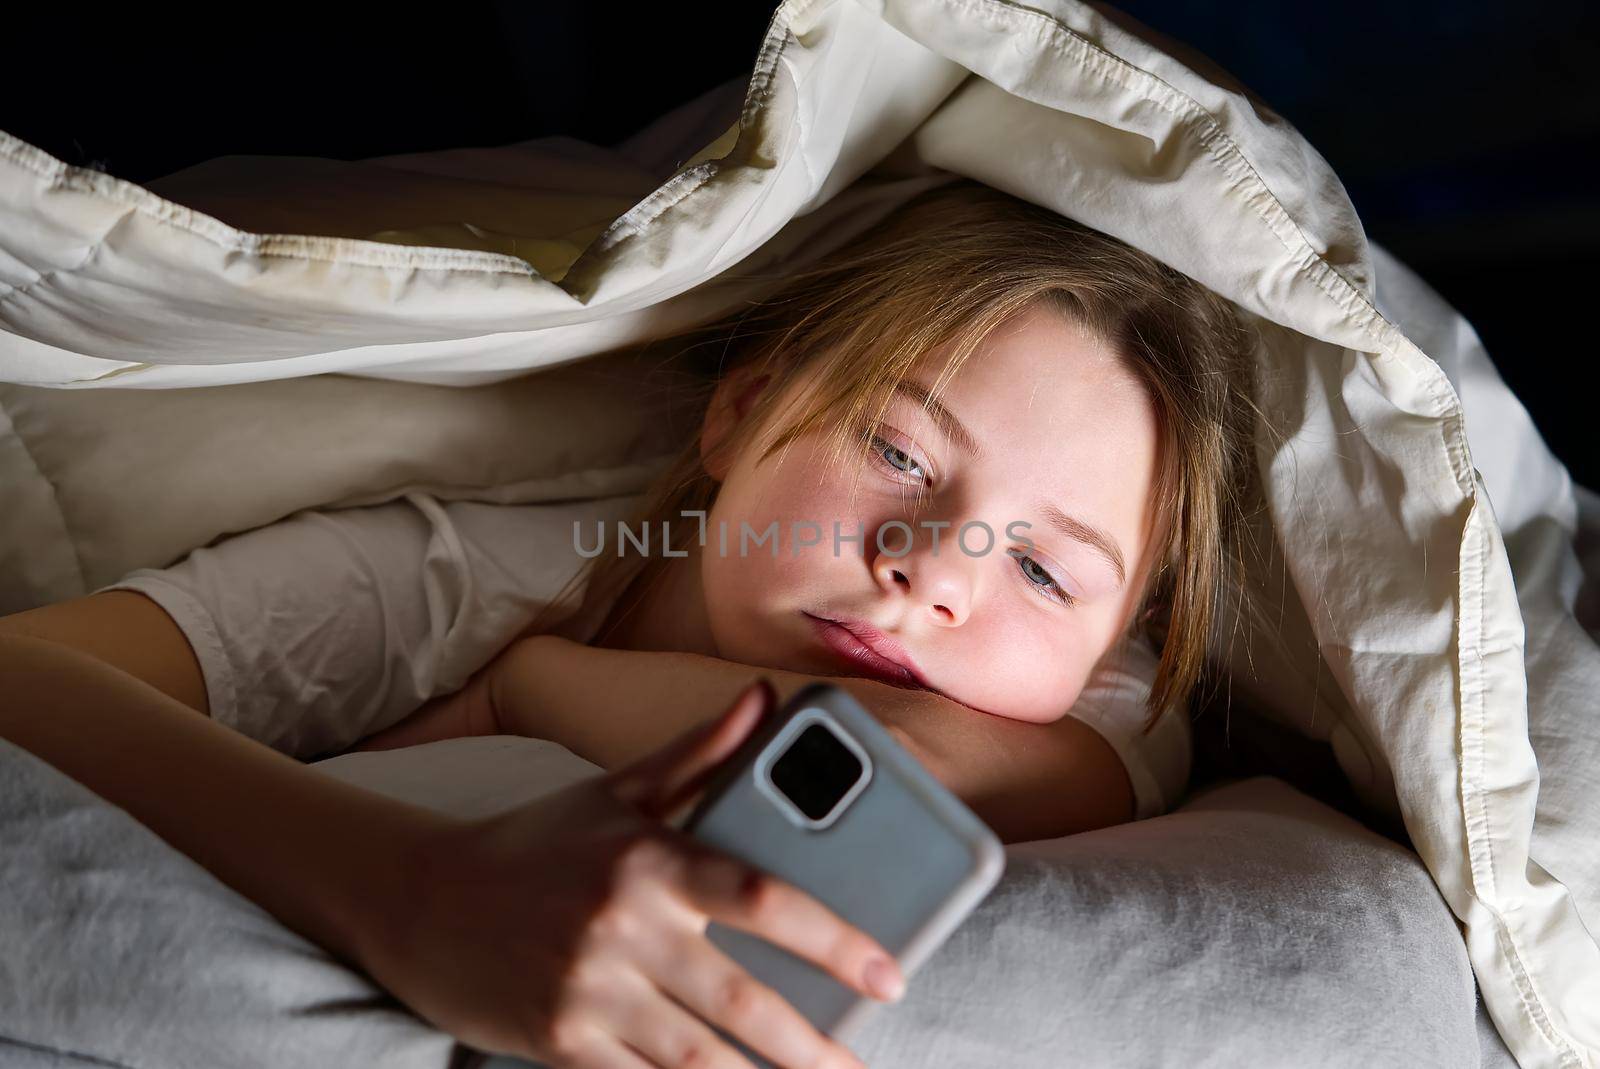 Portrait of girl with mobile phone under blanket at night. Gadget night. Social media addiction. Cyber bullying by PhotoTime